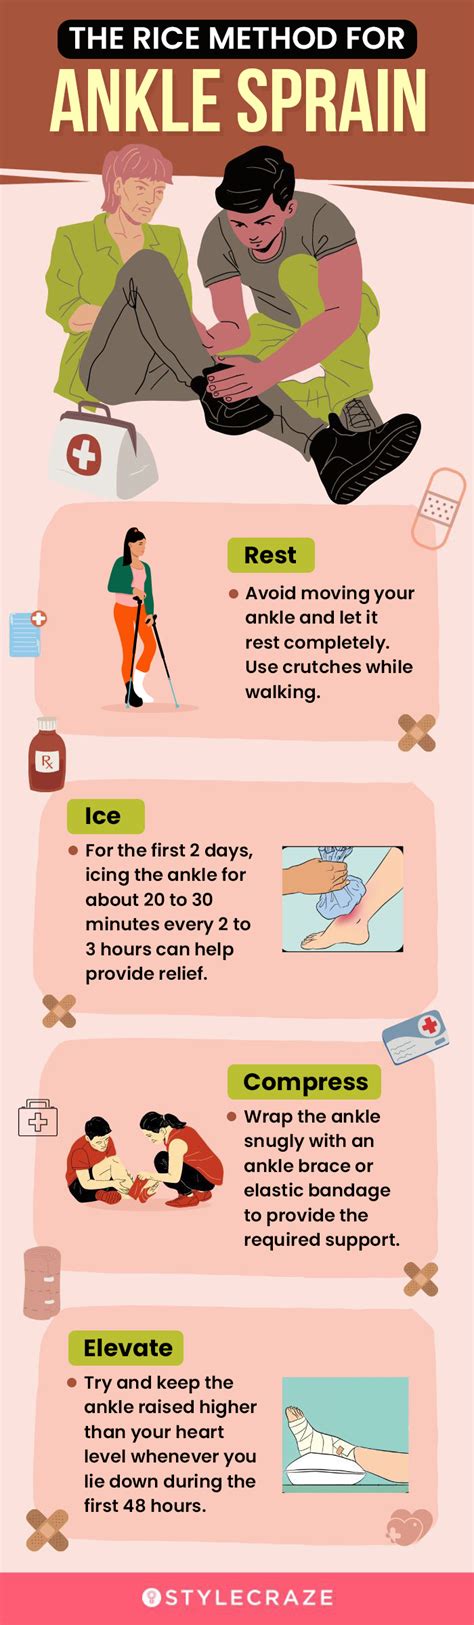 Infographic Ankle Sprain Treatment And Prevention Tim